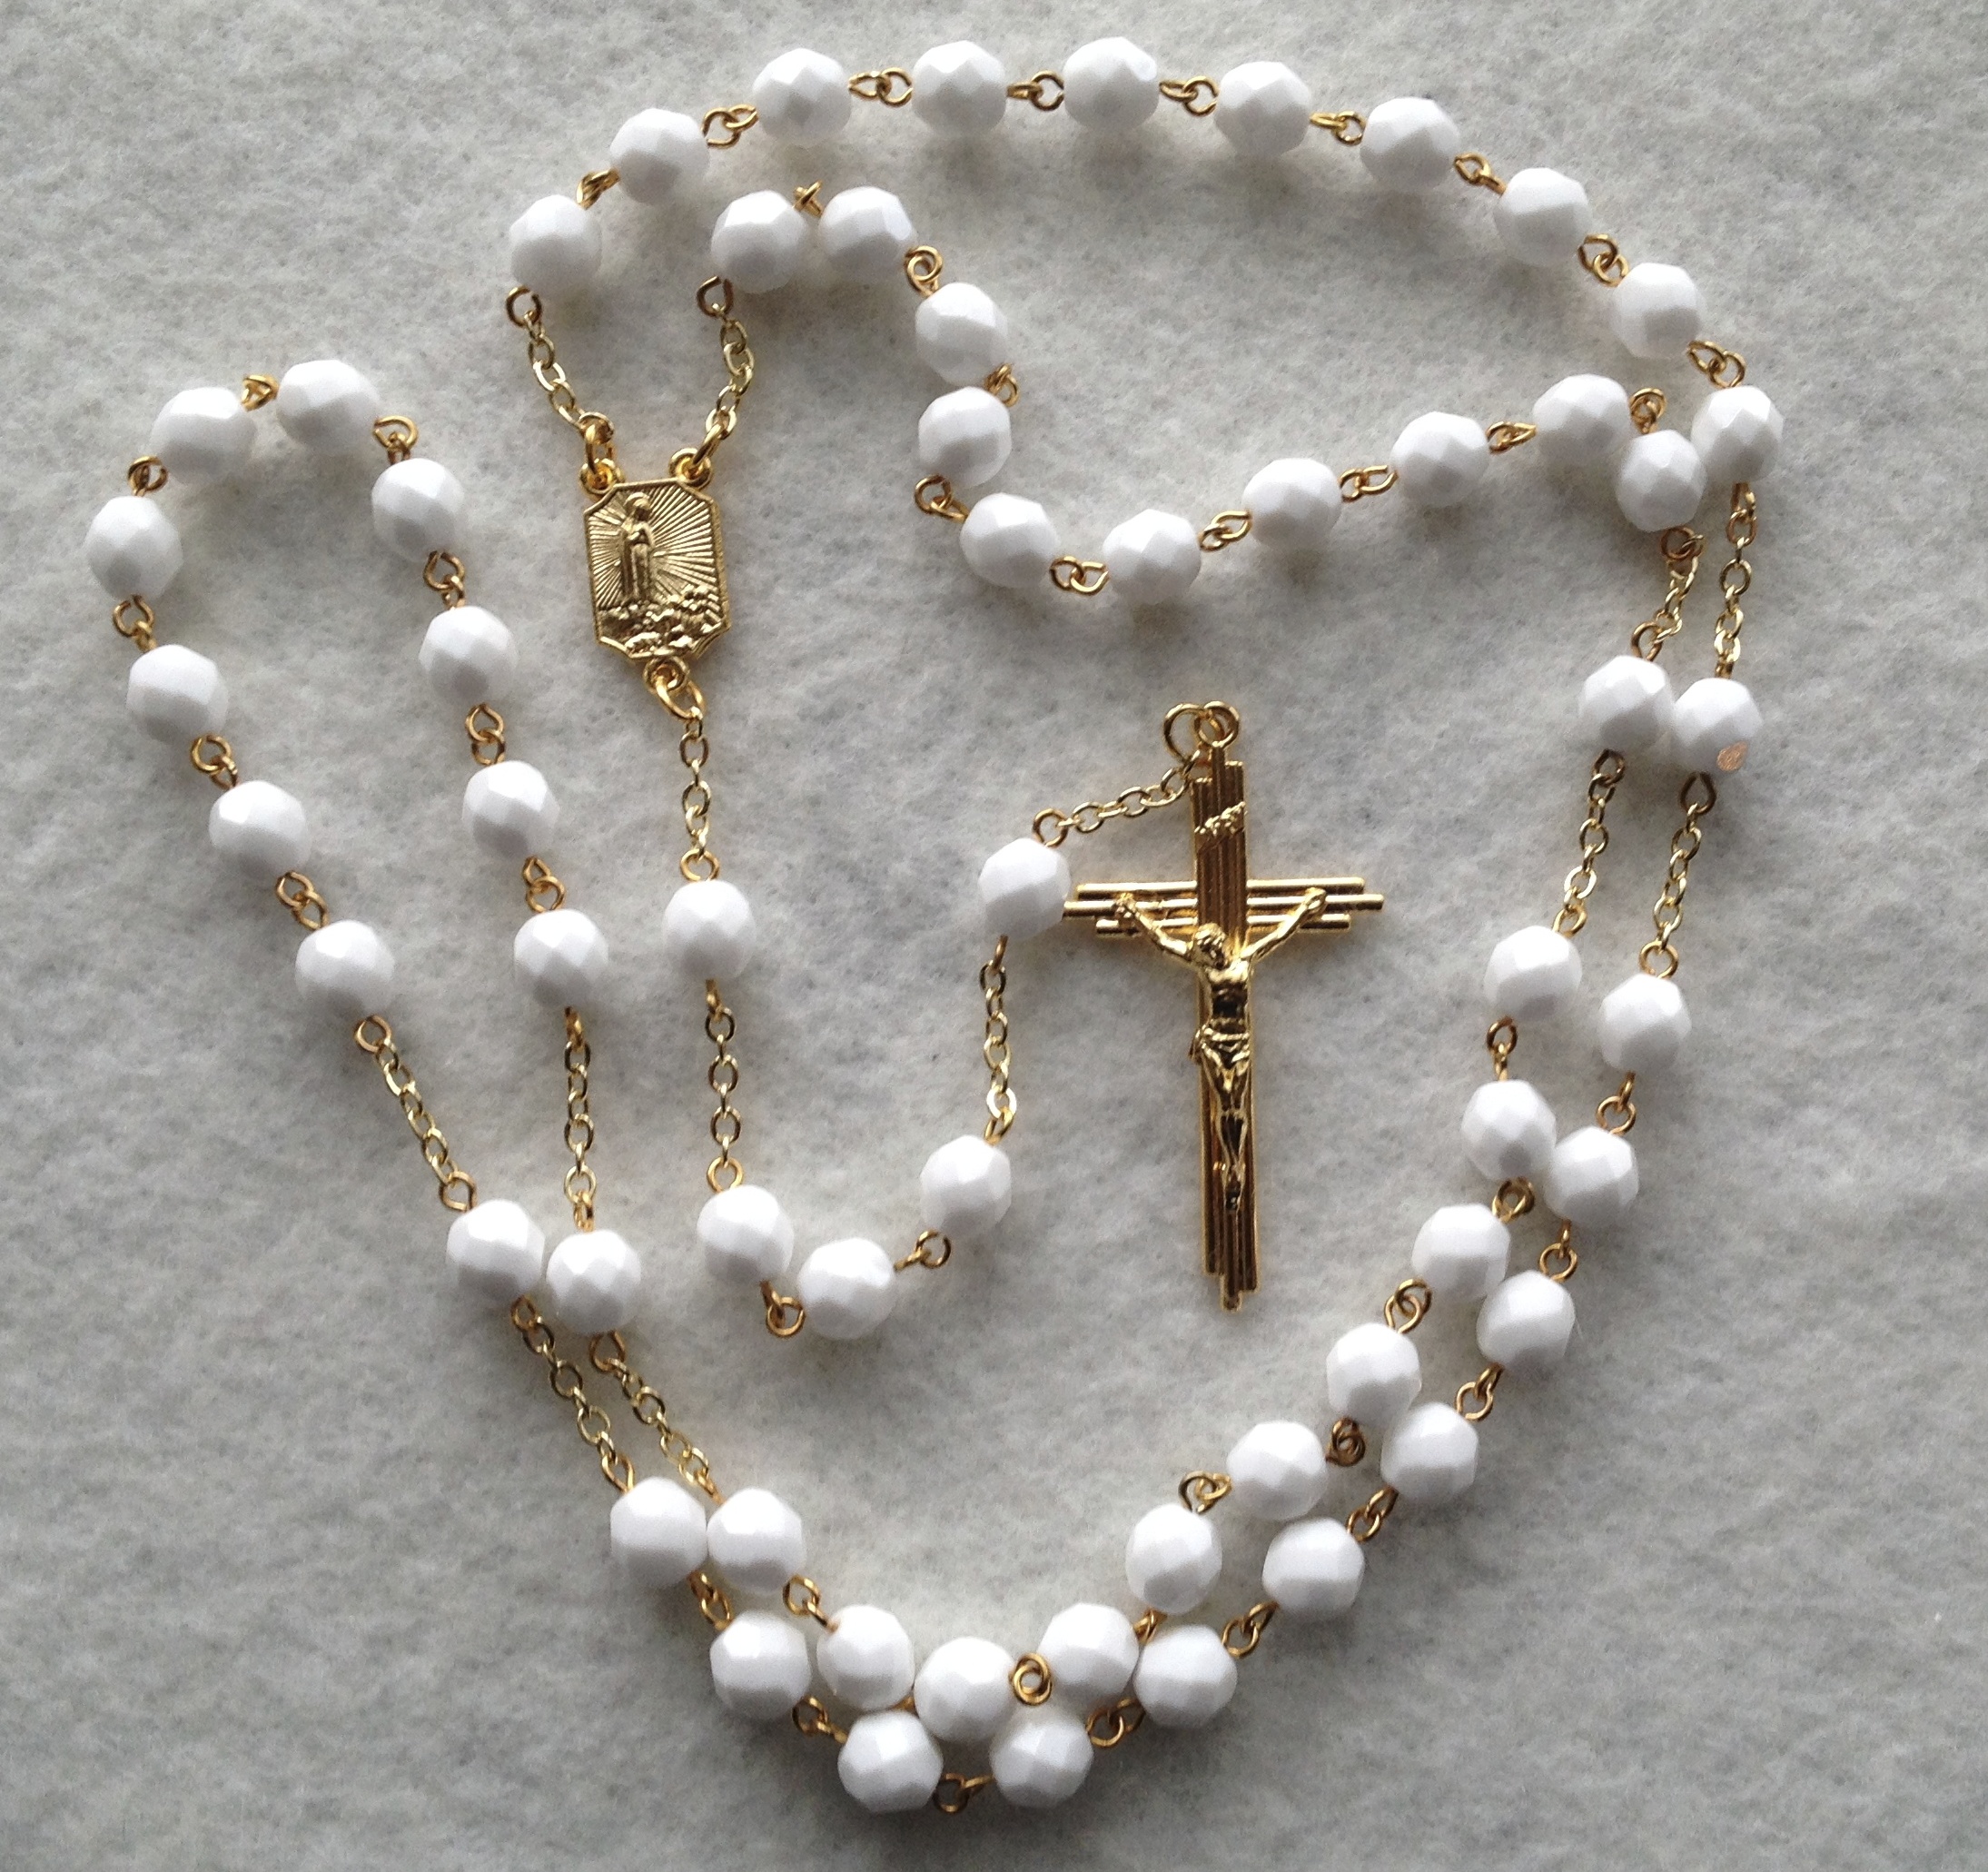 White Opaq Rosary gold tone 8 mm beads, link to purchase button